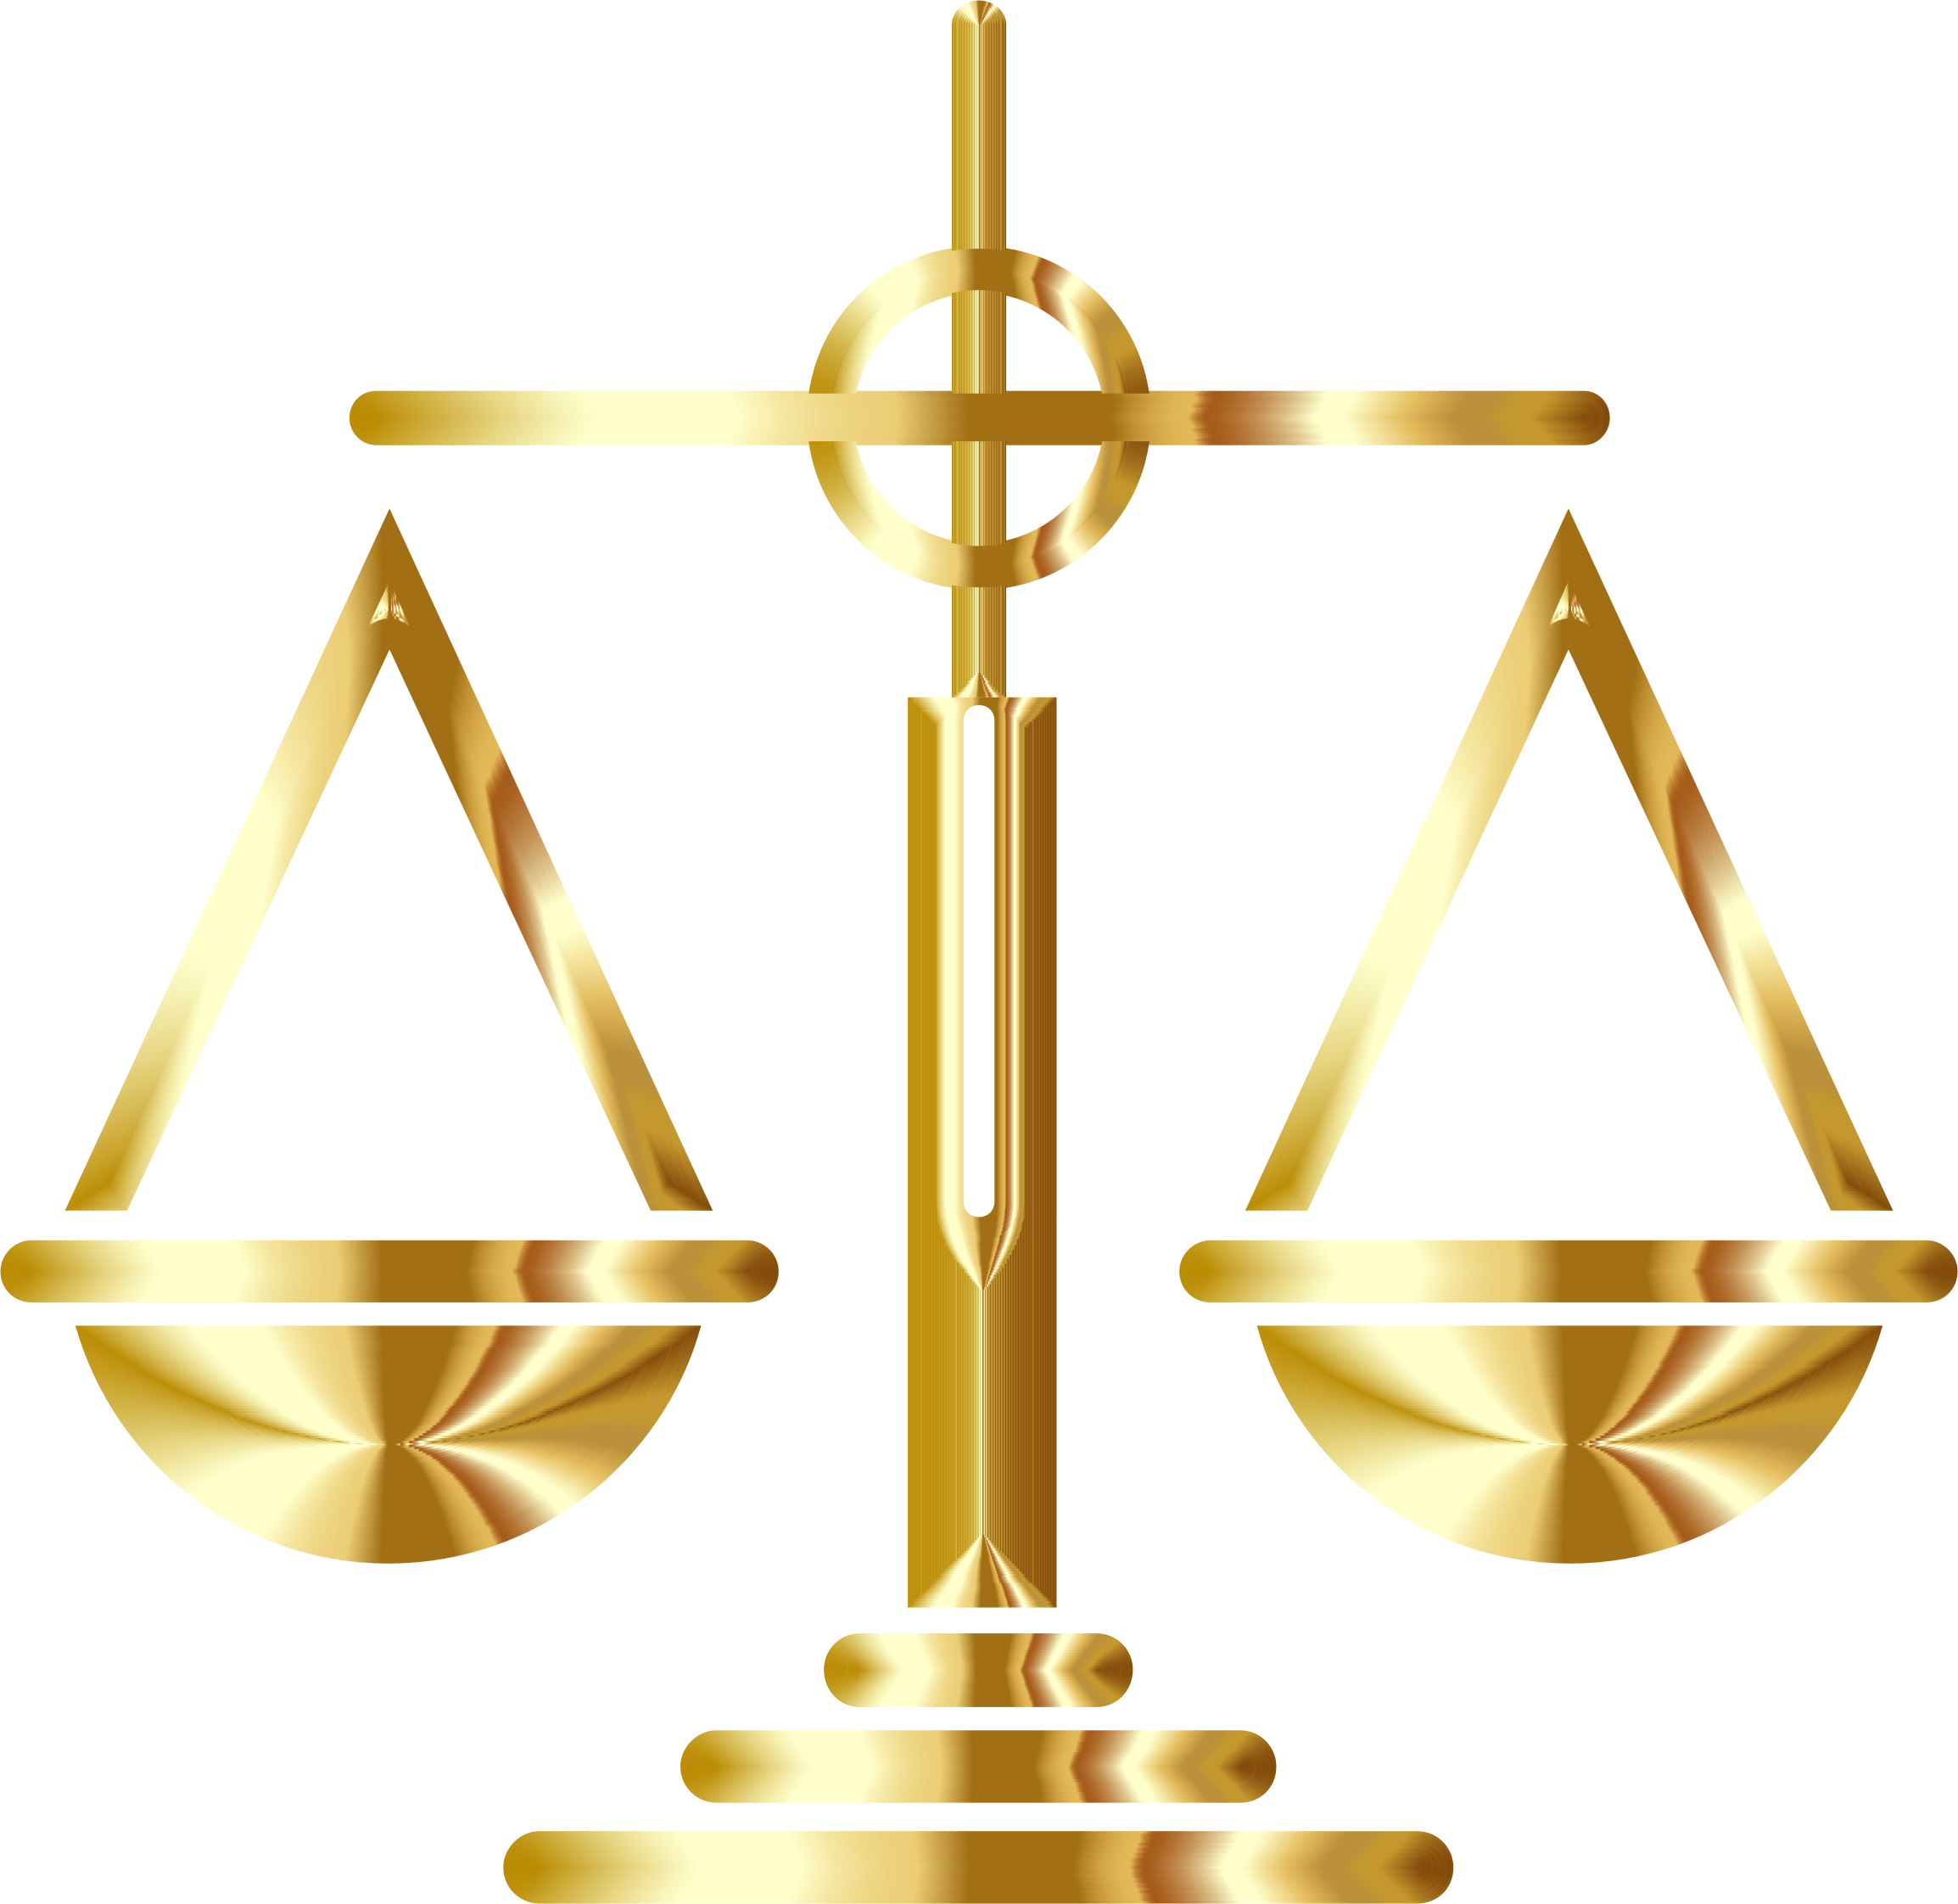 Big Image (Png) - Scales Of Justice, Transparent background PNG HD thumbnail